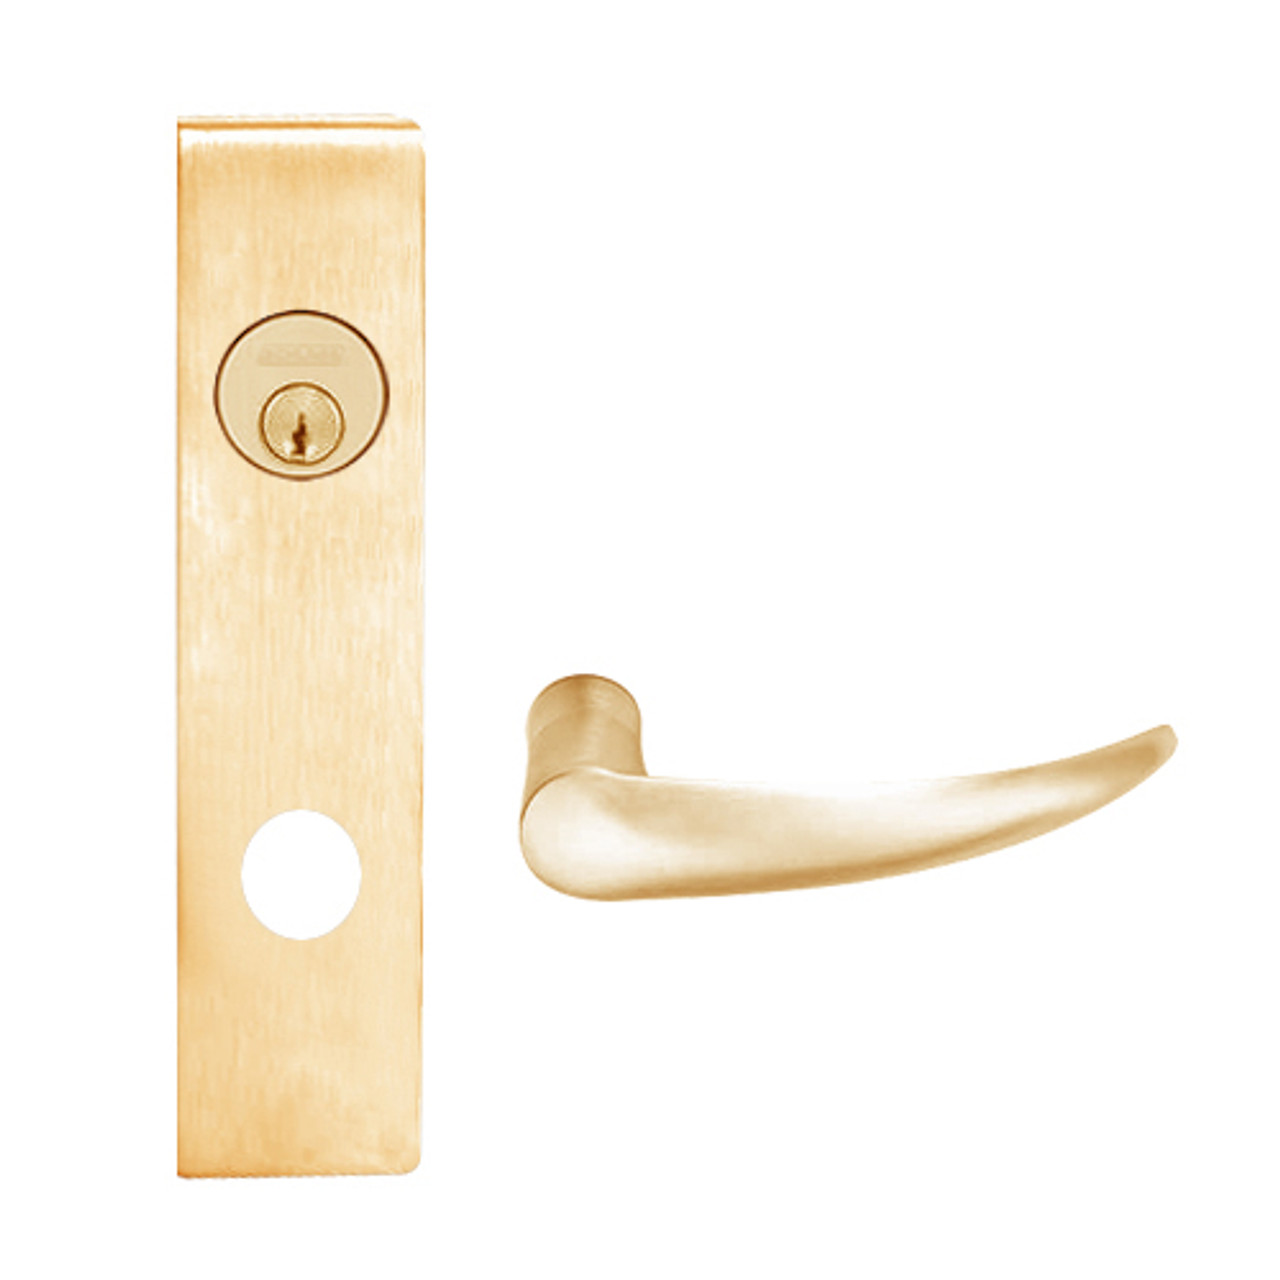 L9026P-OME-L-612 Schlage L Series Exit Lock with Cylinder Commercial Mortise Lock with Omega Lever Design in Satin Bronze